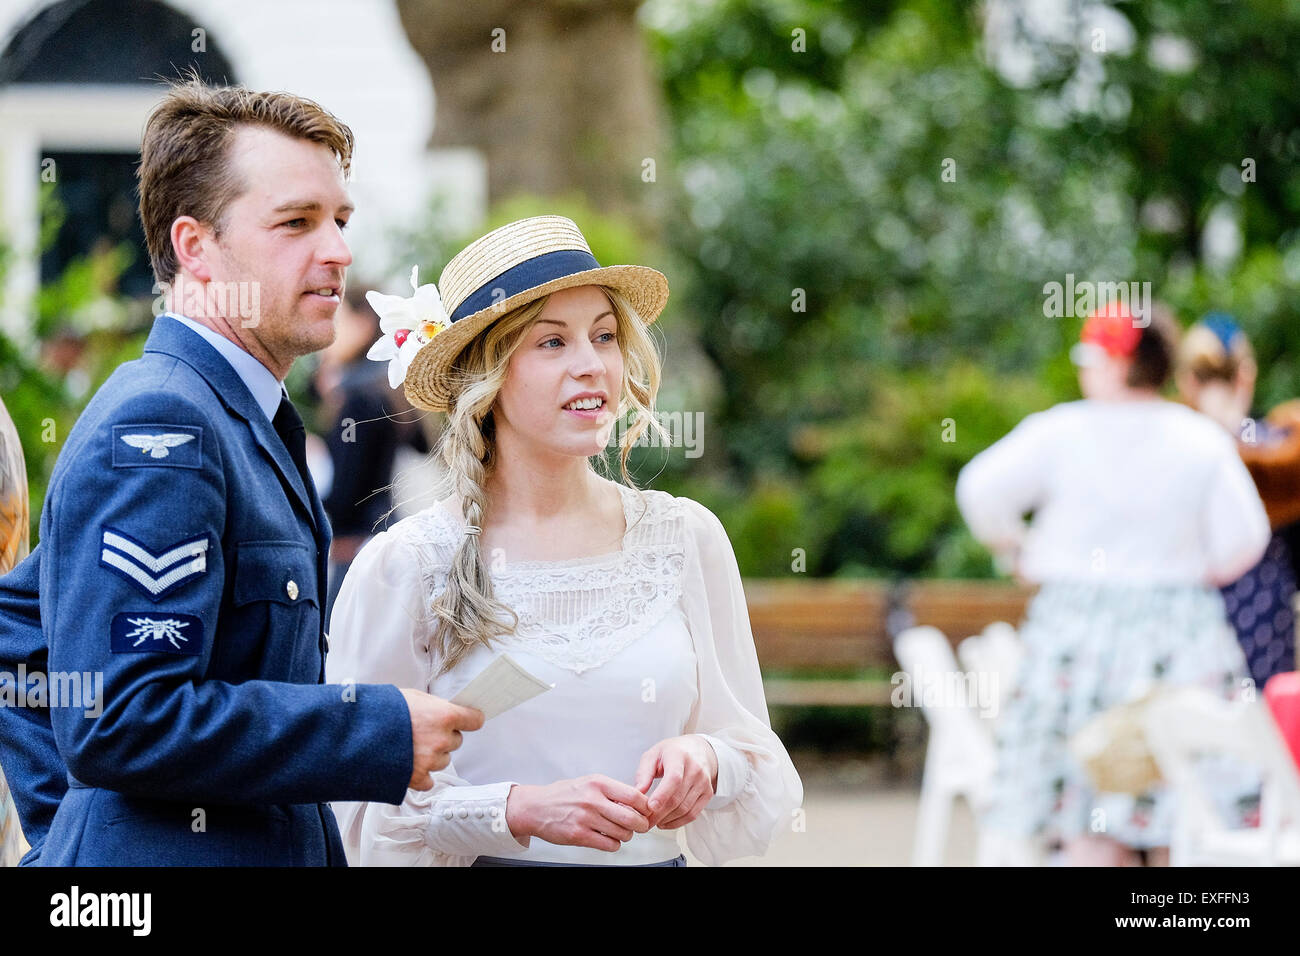 A couple at The Chap Olympiad in Bloomsbury, London Stock Photo - Alamy